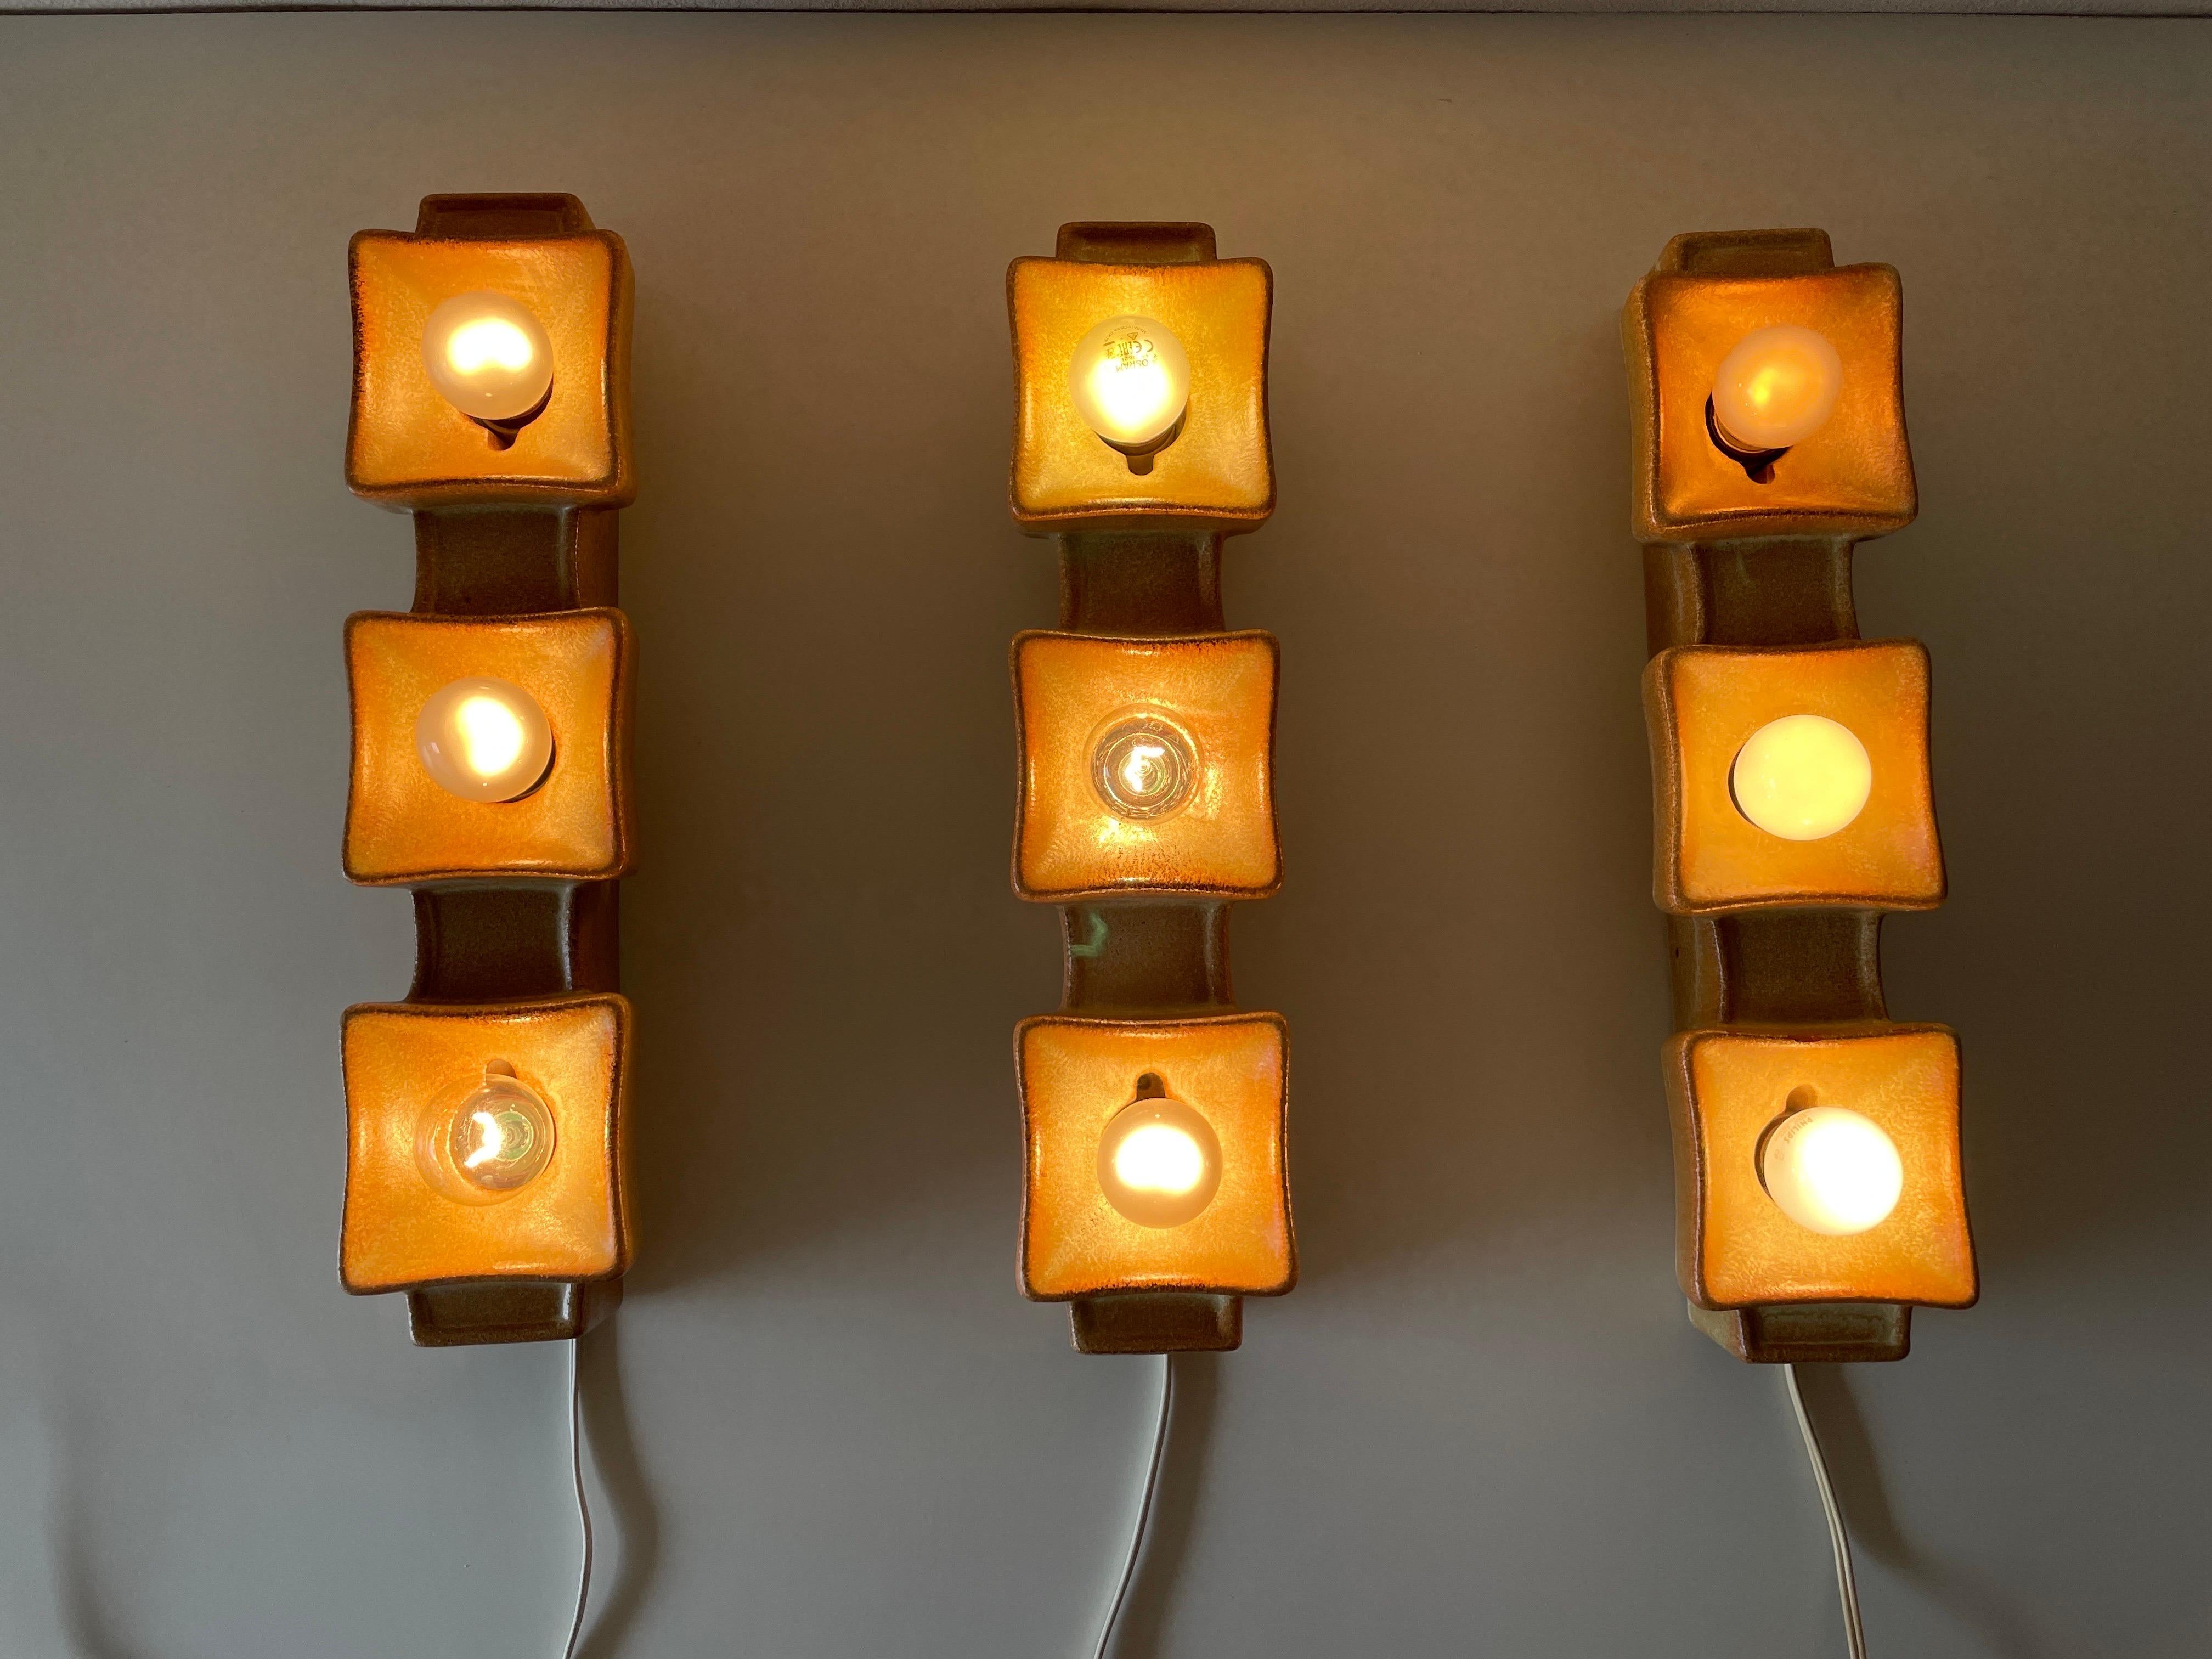 Brown Ceramic Set of 3 Sconces by Pan Leuchten, 1970s, Germany For Sale 4